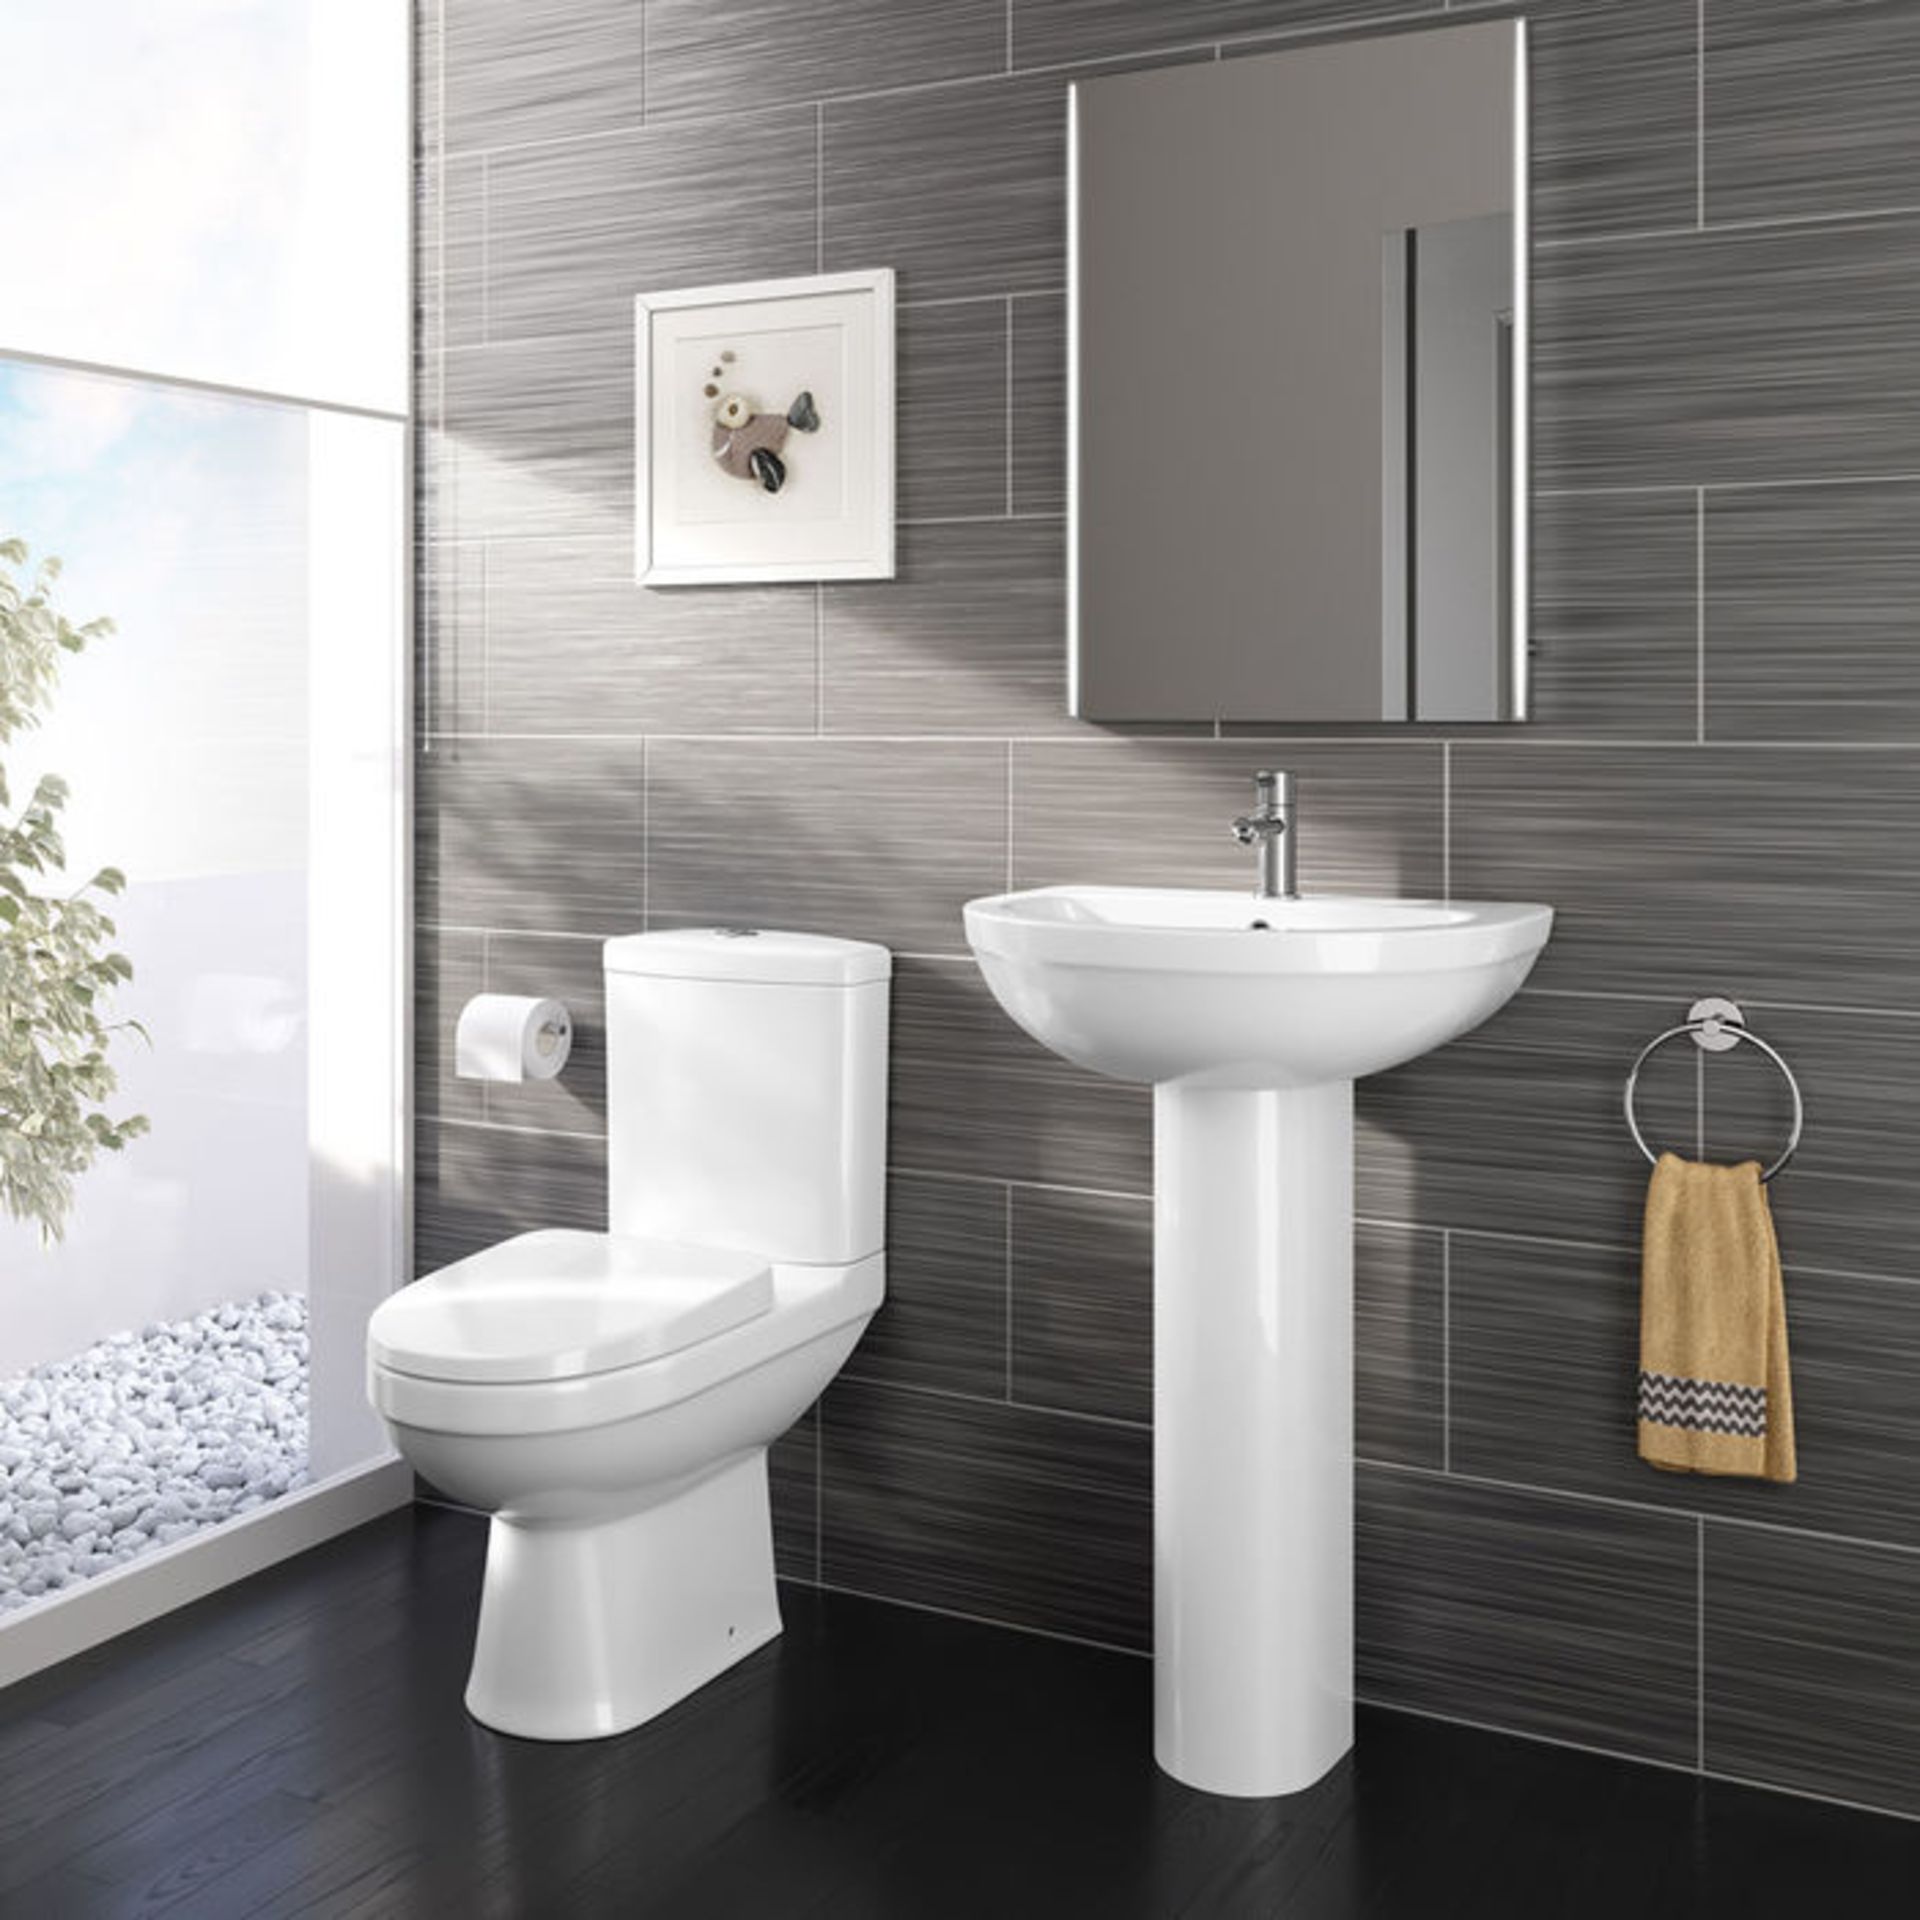 (DK37) Sabrosa II Close Coupled Toilet & Cistern inc Soft Close Seat Made from White Vitreous - Image 4 of 5